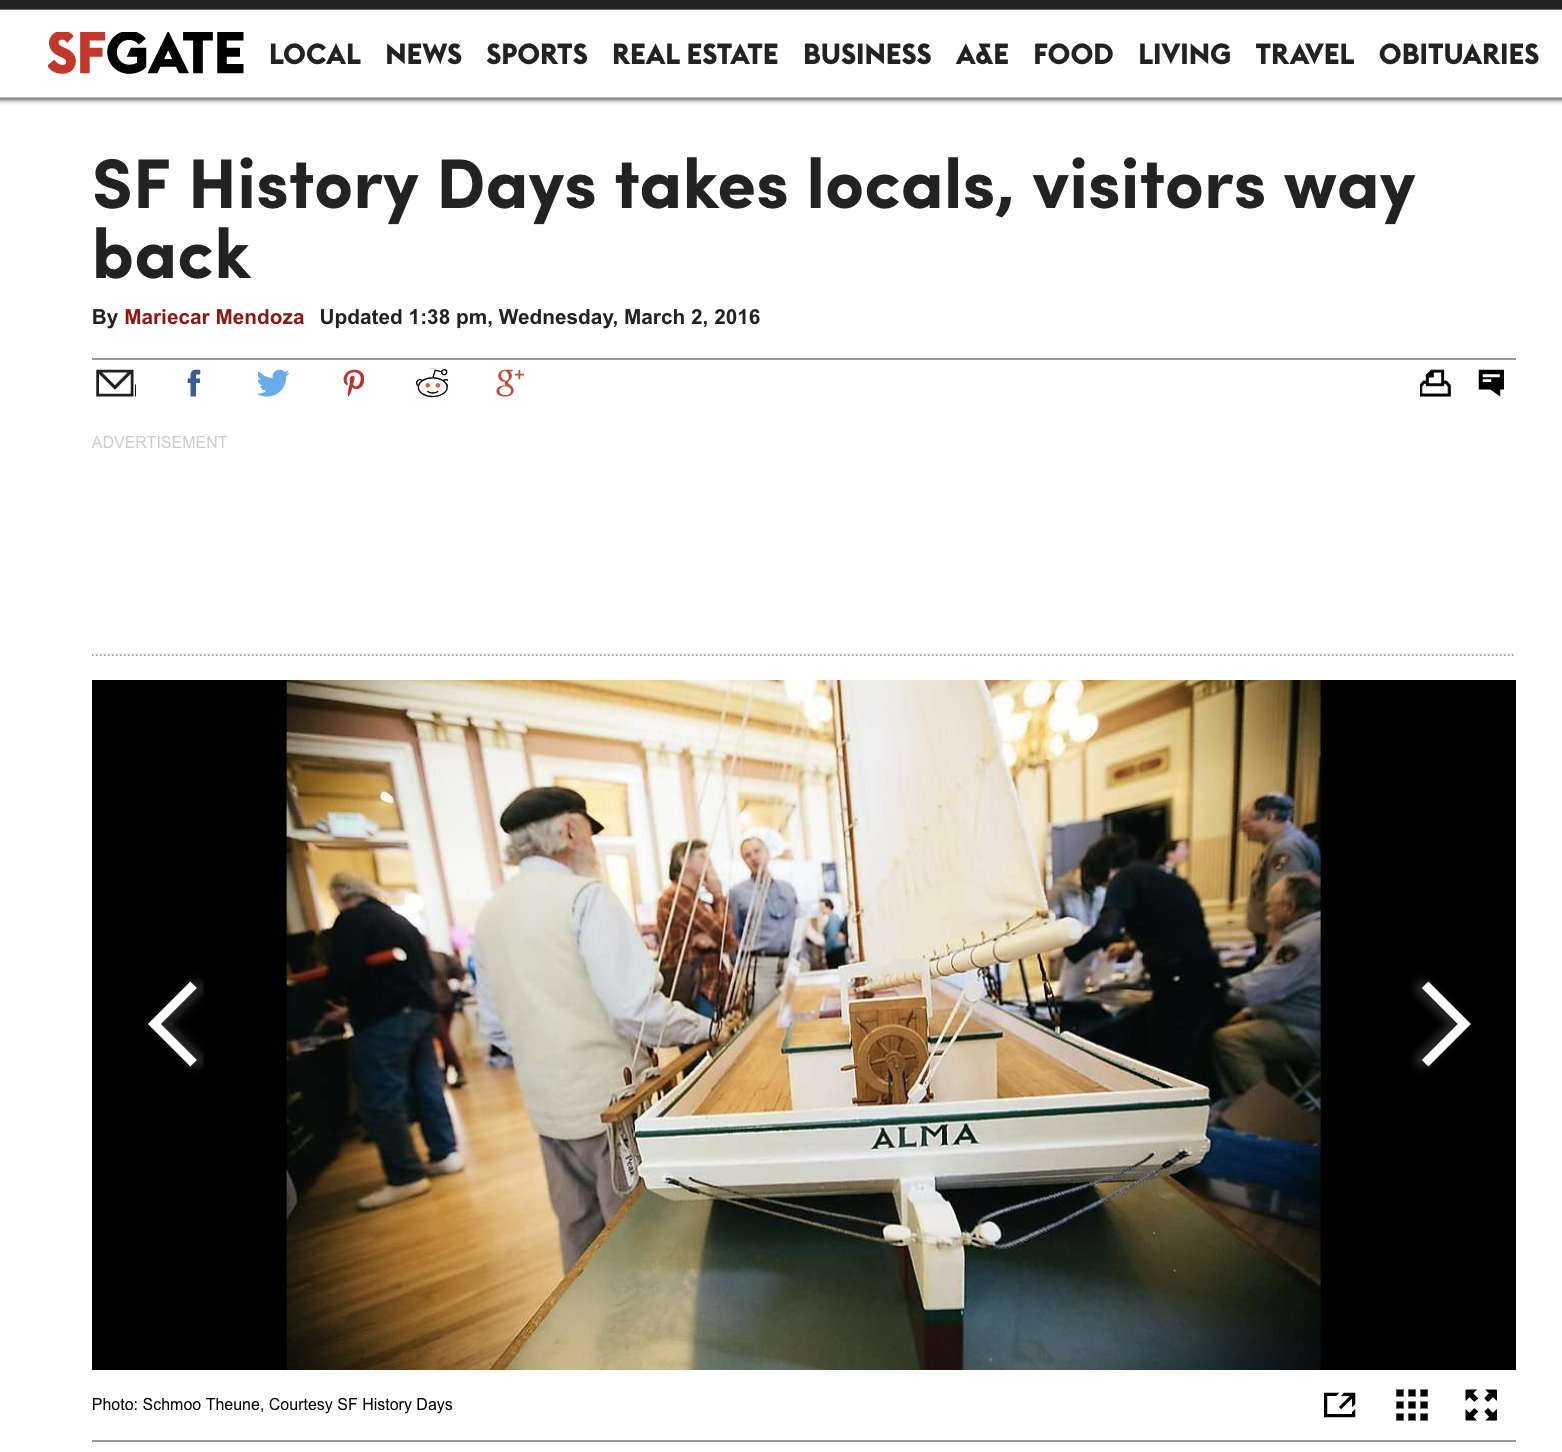 SF_History_Days_takes_locals__visitors_way_back_-_SFGate.png